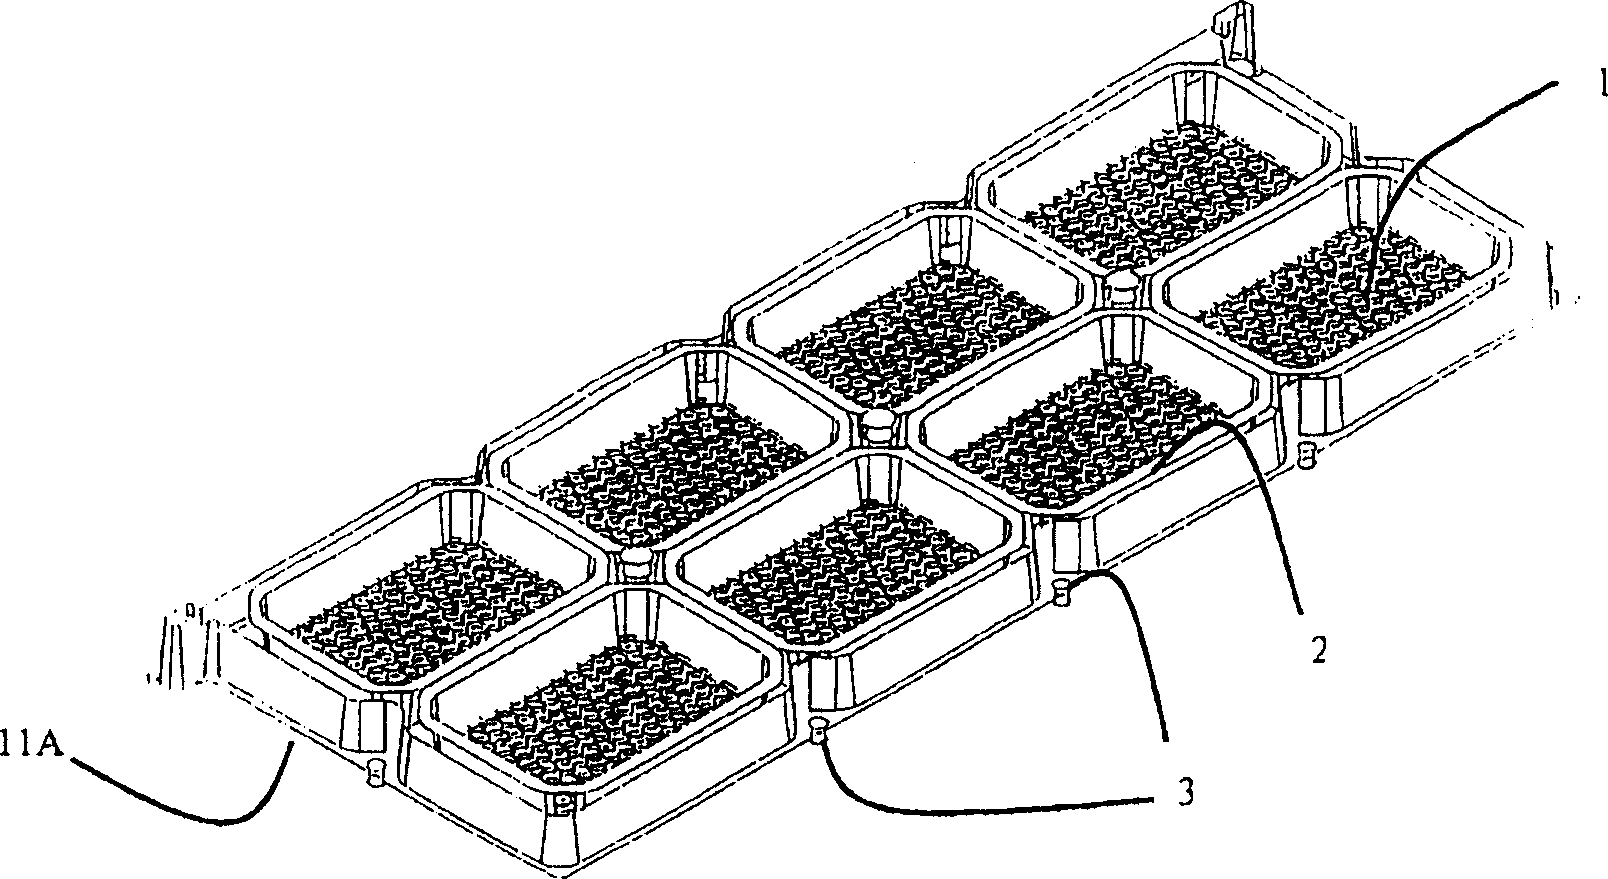 Device for the production of comb honey